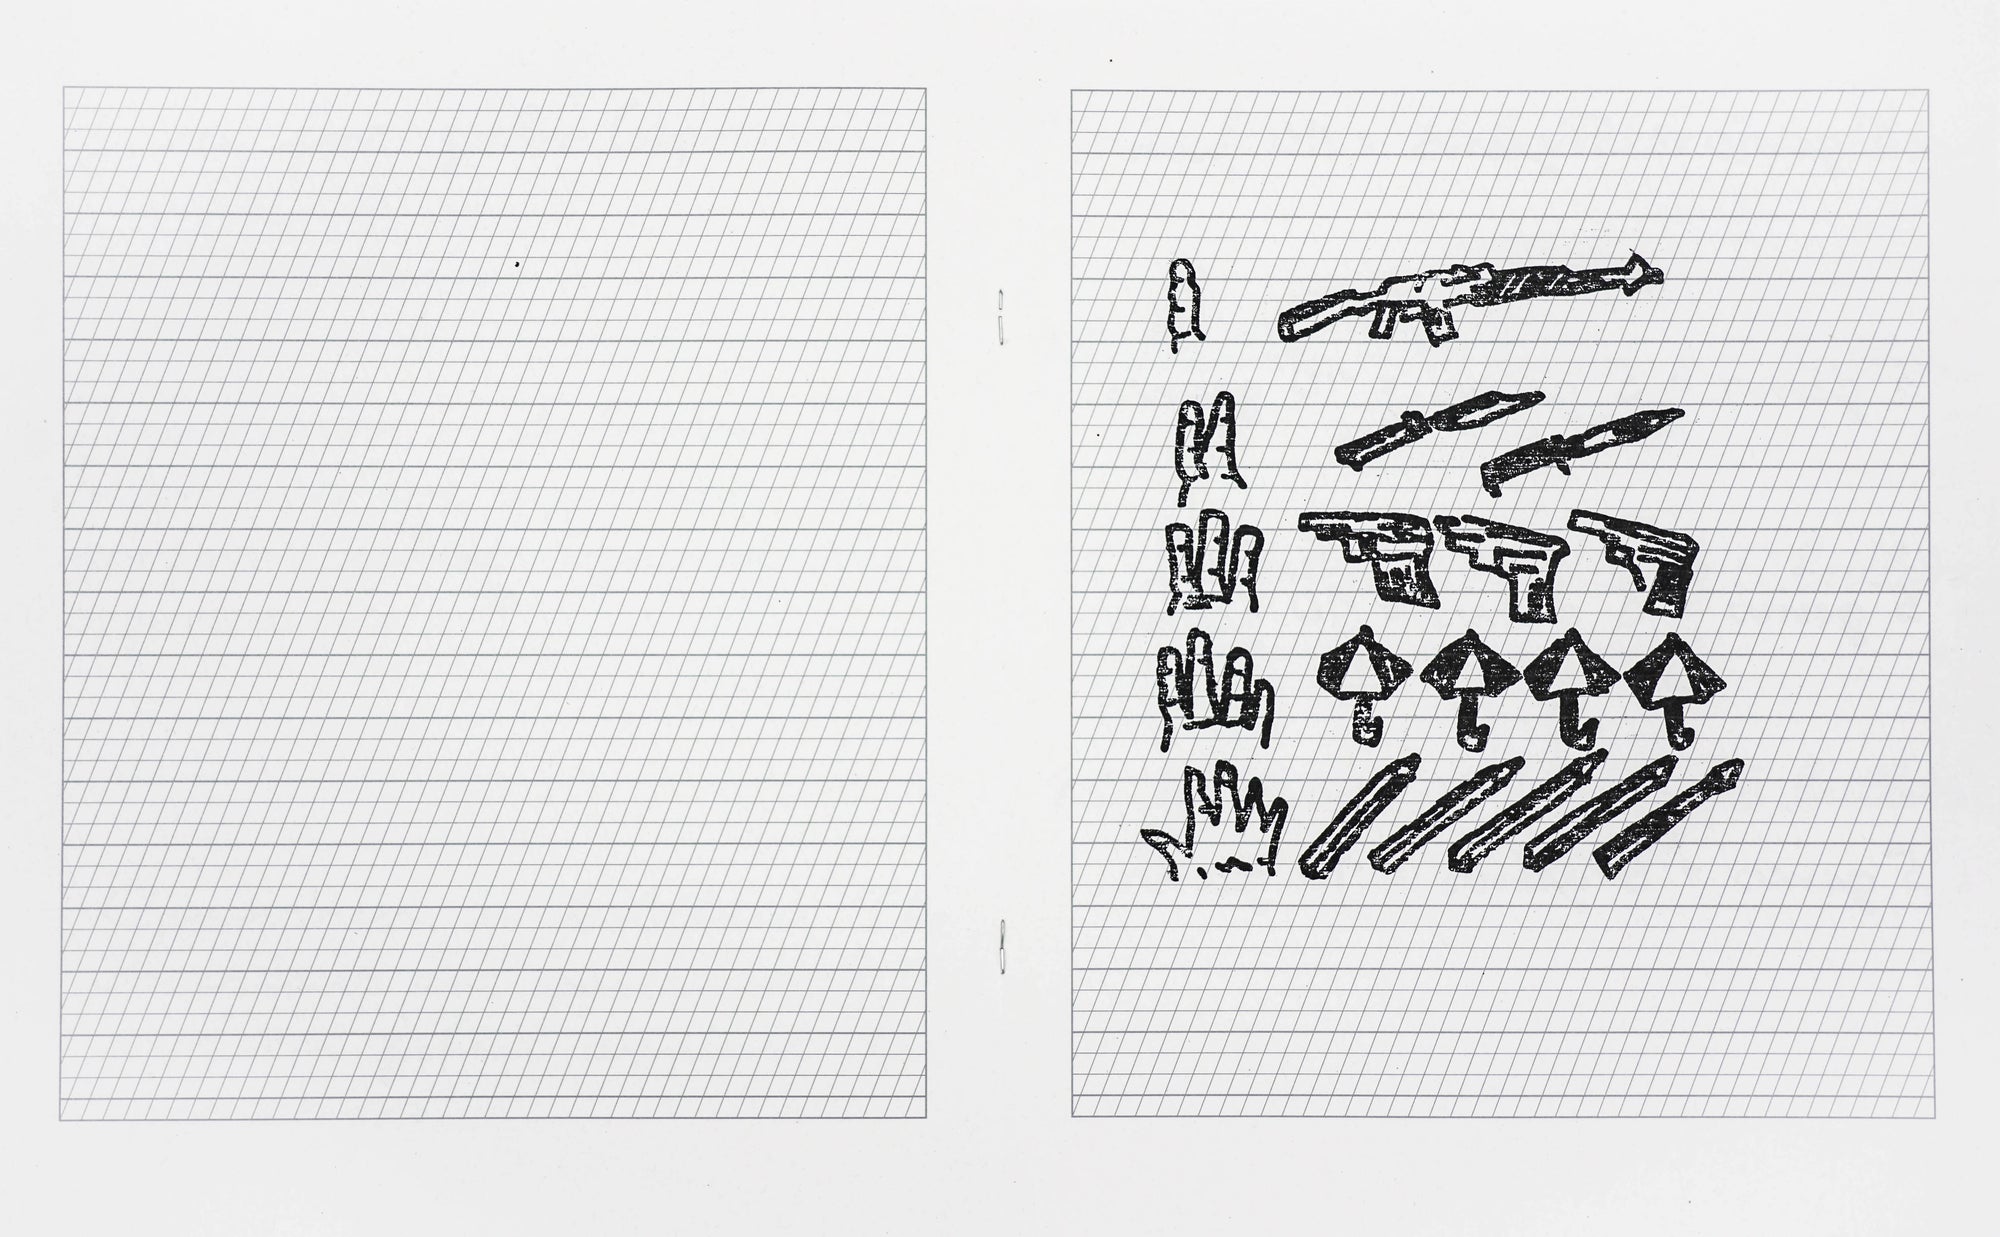 Book spread with white background and two patterned rectangles on each side. In the right half are black hand drawn images of hands, umbrellas, knives, firearms.